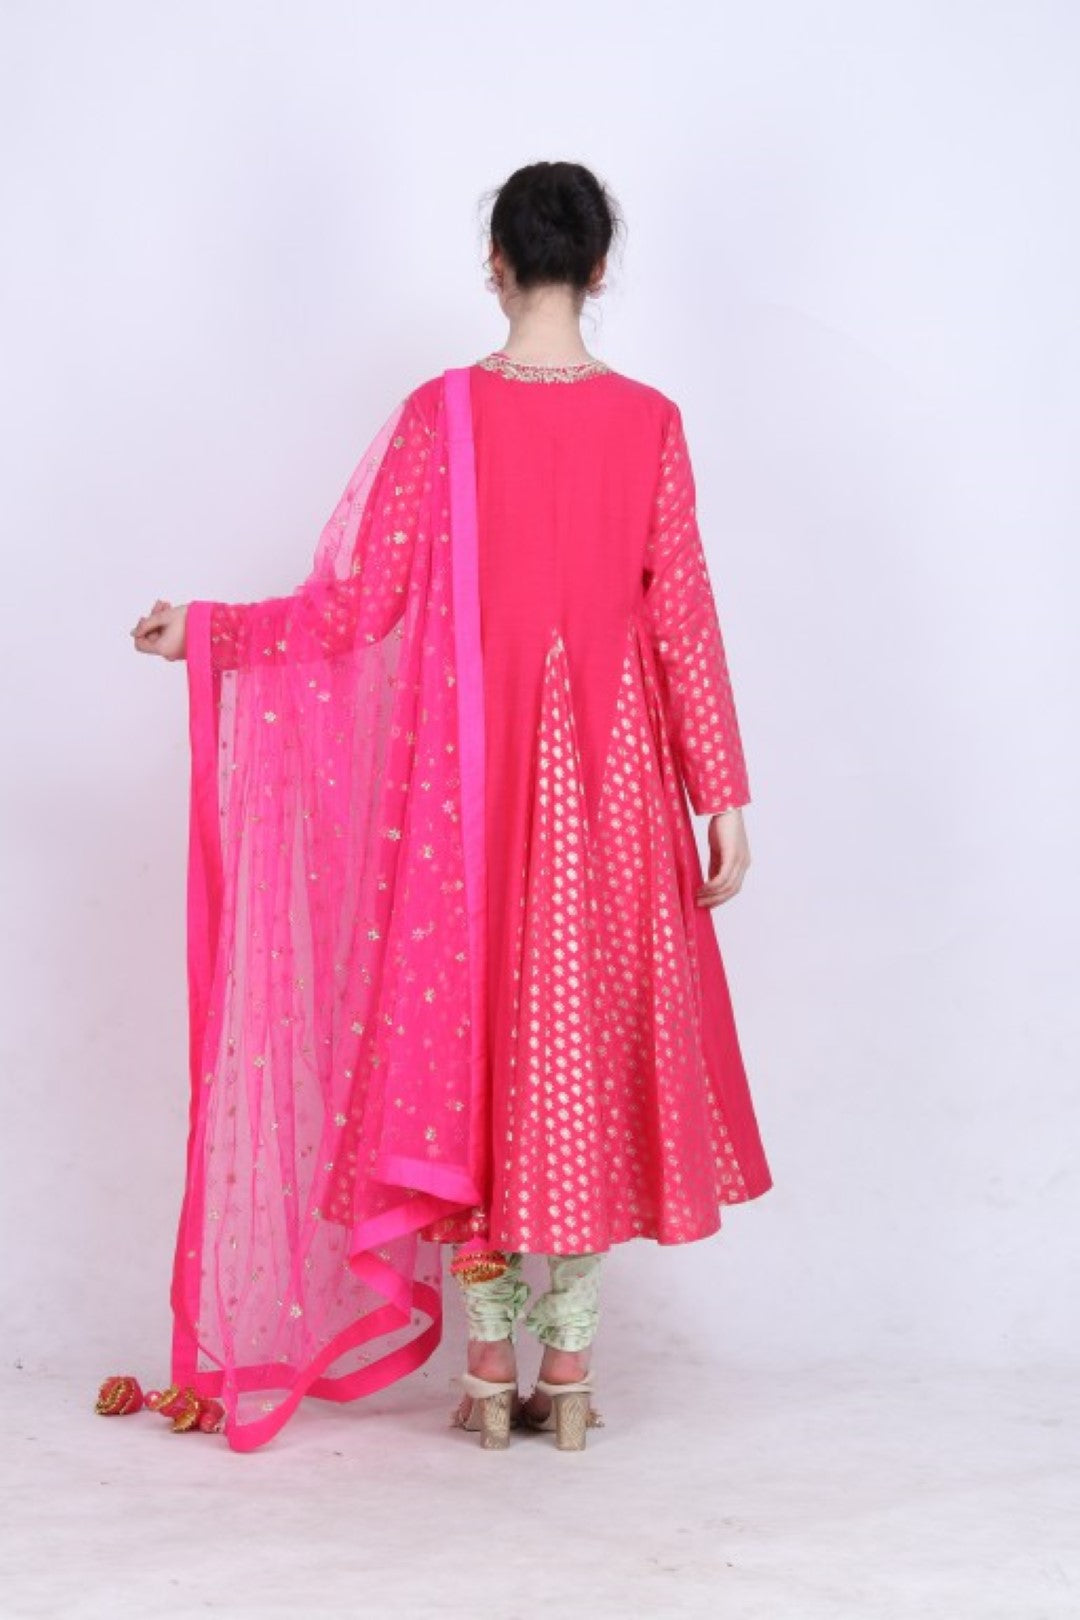 Hot pink gold foil printed goddet styled kurta with embroidered mukesh net dupatta and gold foil printed pista churidar.